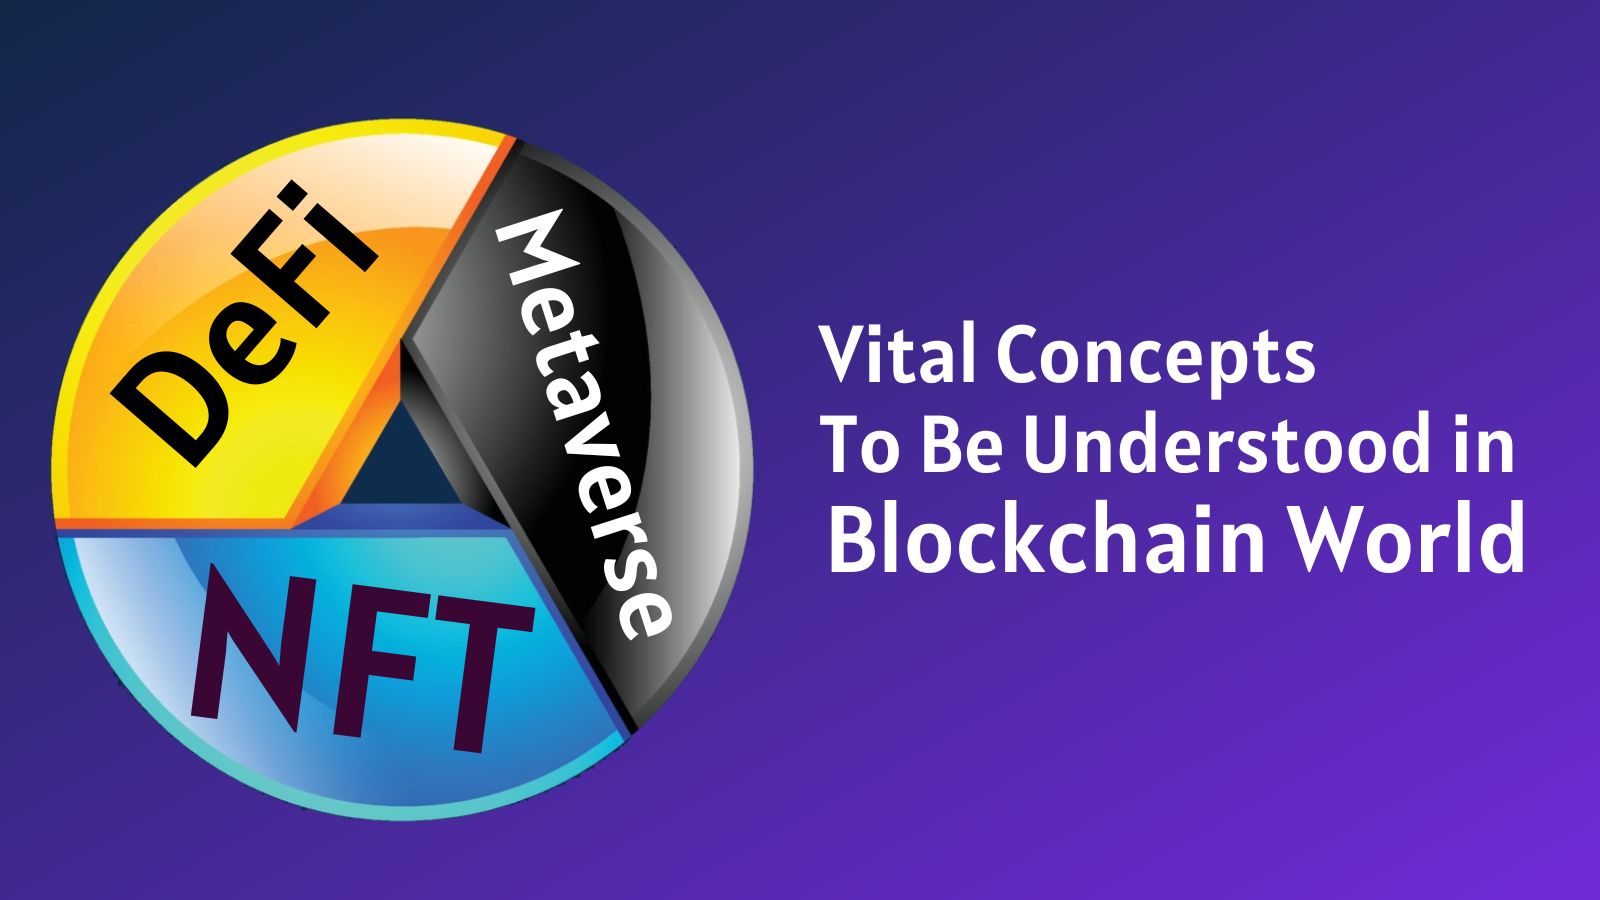 Why Does The Role Of NFT, Metaverse & DeFi Is Important in Blockchain World